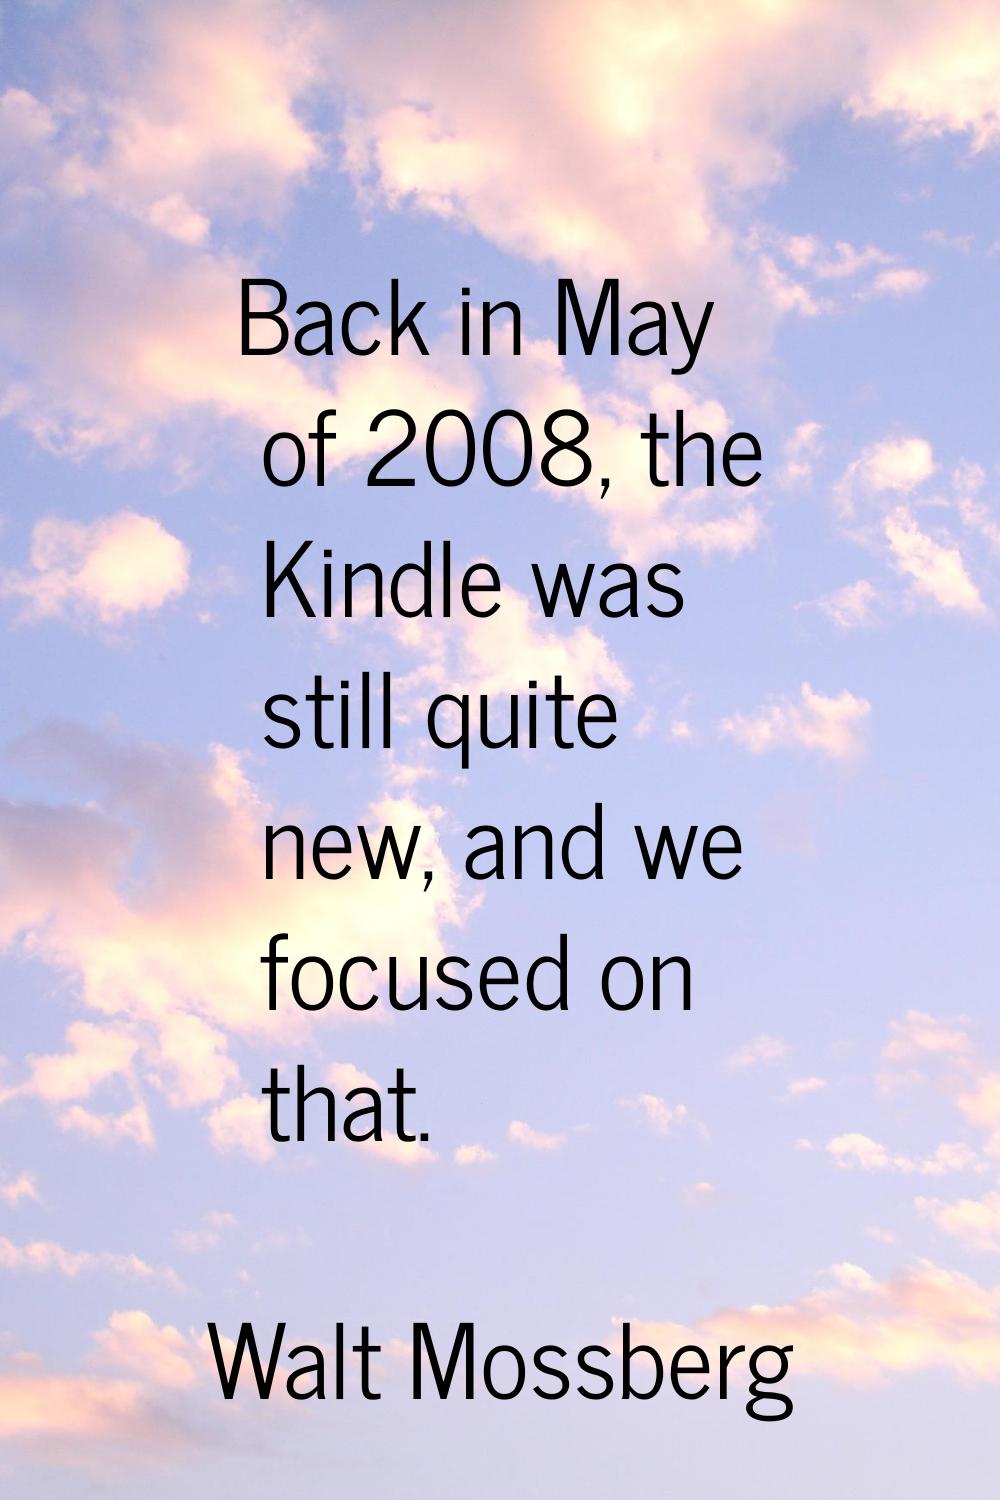 Back in May of 2008, the Kindle was still quite new, and we focused on that.